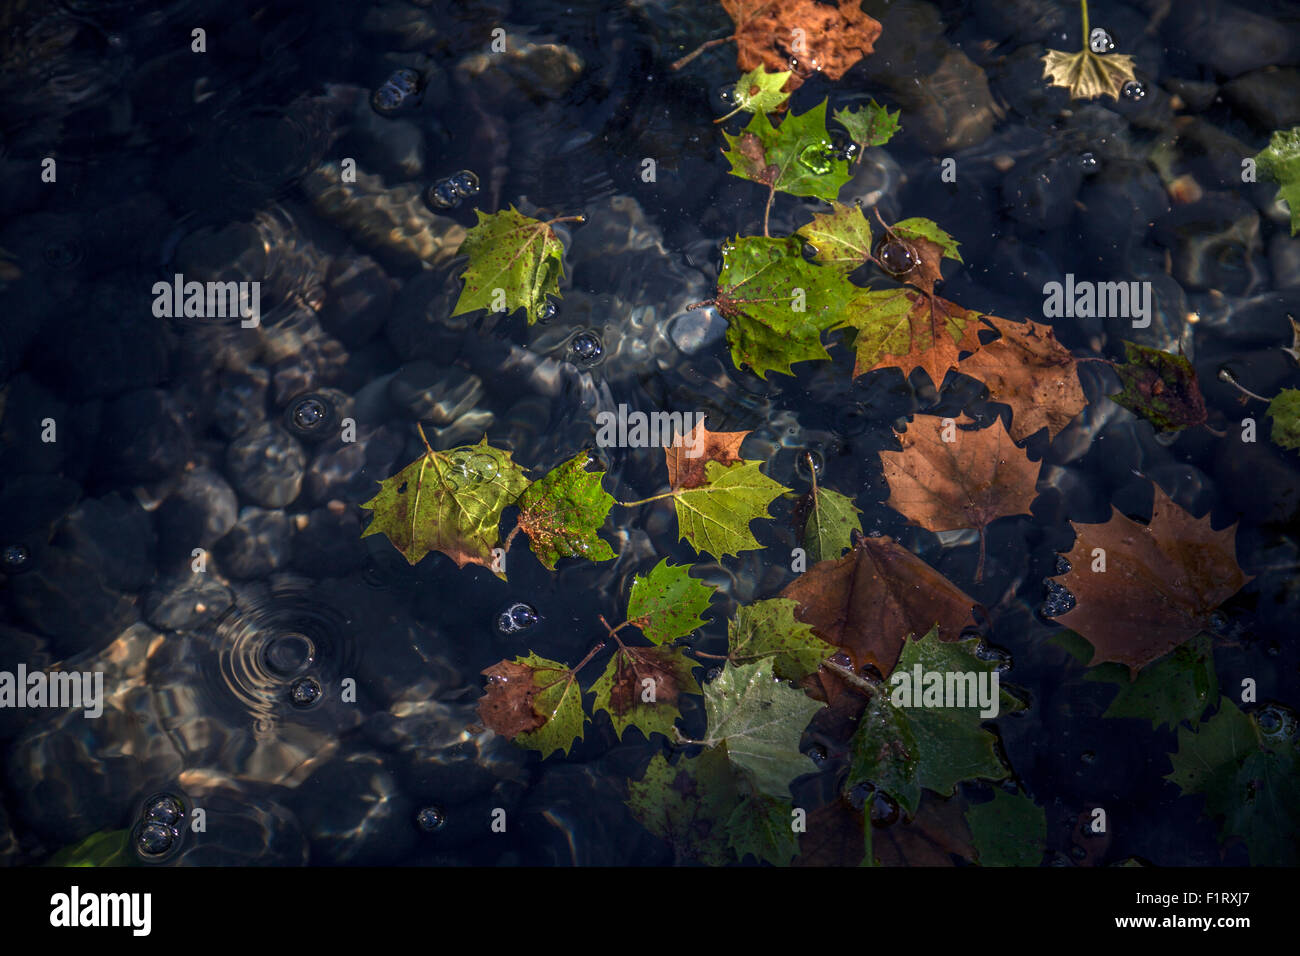 Dead leaves floating in a pond, Kenwood, California, USA Stock Photo